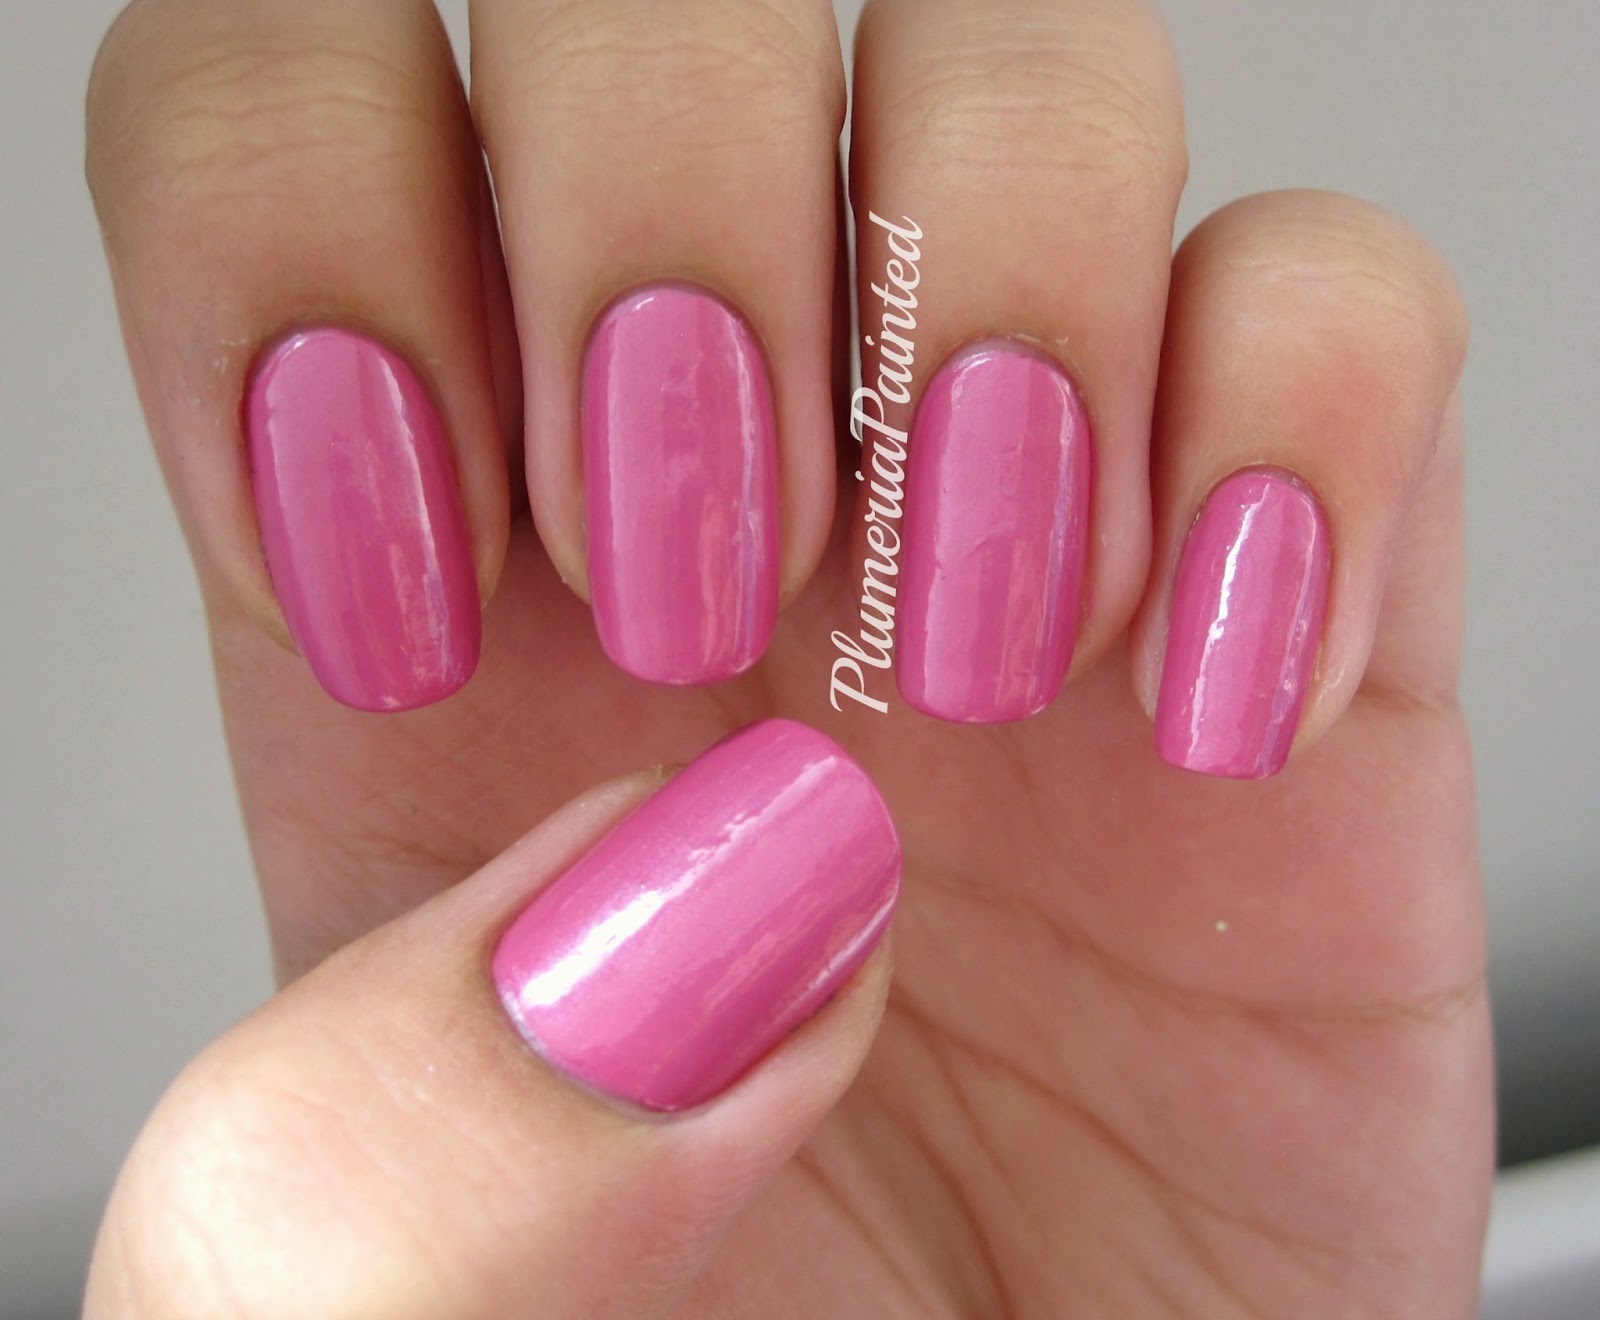 1. OPI Nail Lacquer in "Metallic Rose" - wide 6